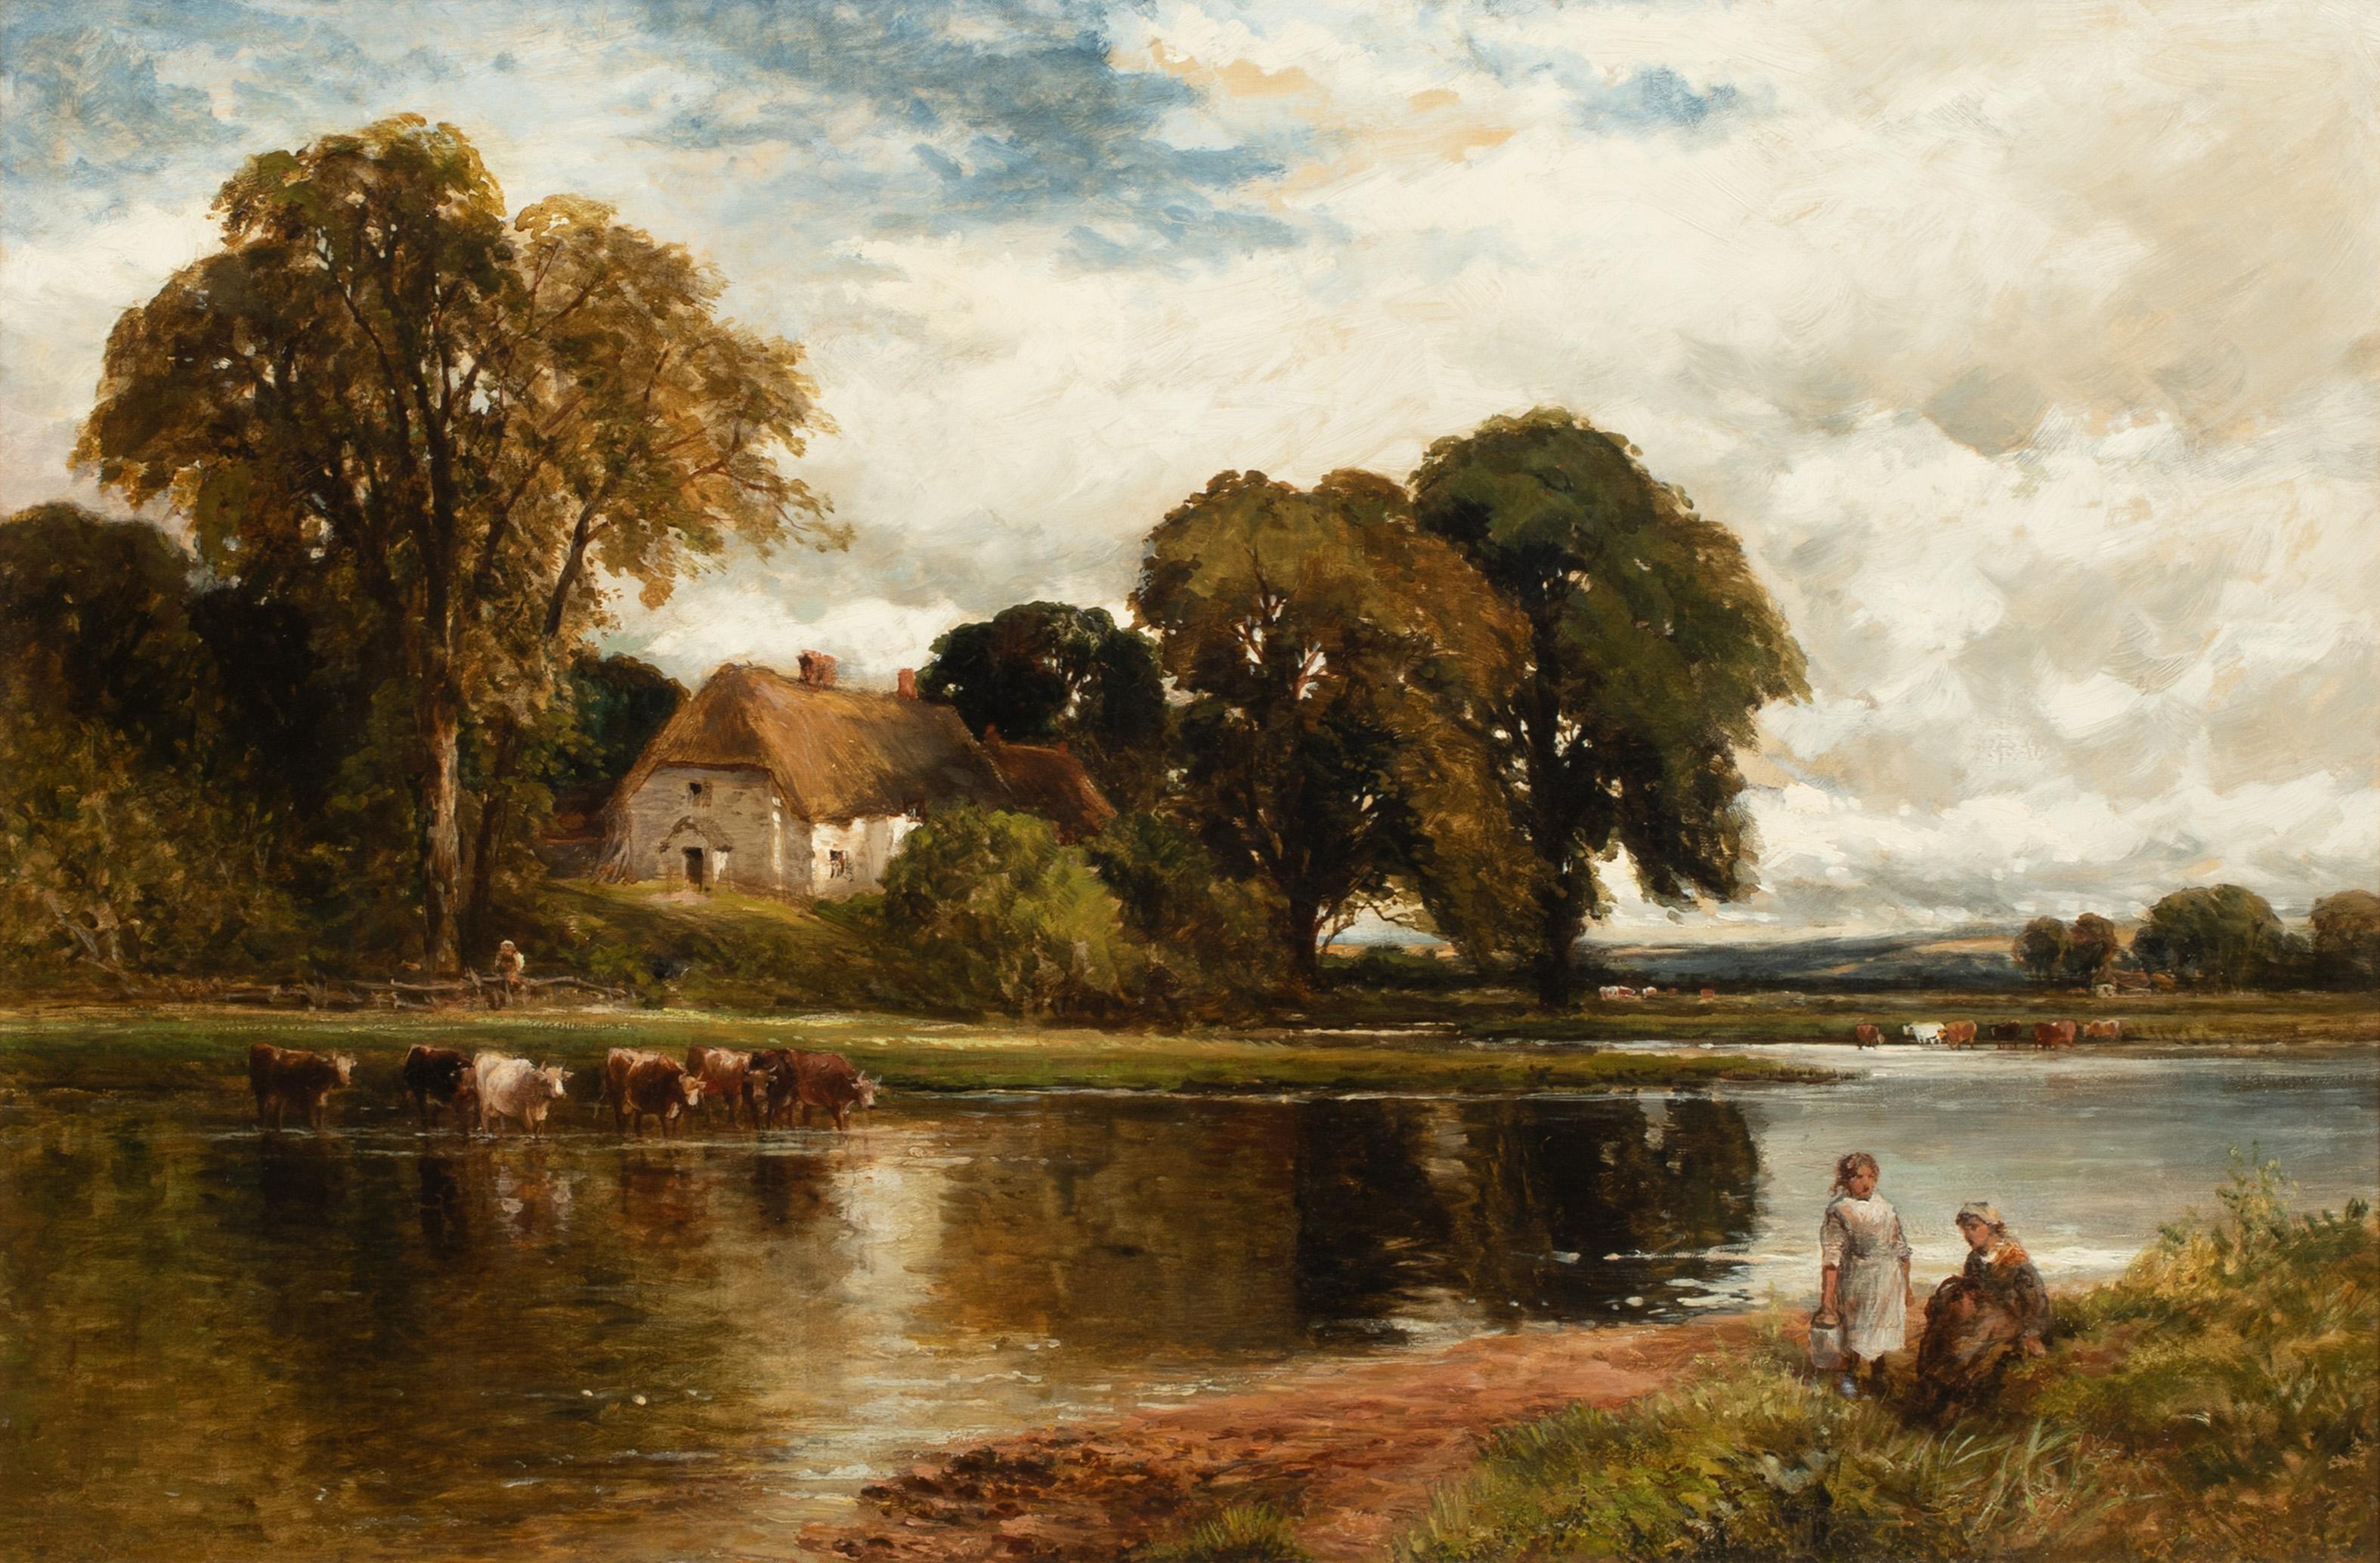 Cattle & Maids In A River Landscape, 19th Century 

circle of Benjamin Williams LEADER (1831-1923)

Huge 19th Century English School scene of young maid and cattle watering in a country river landscape, oil on canvas. Extensive view from the water's